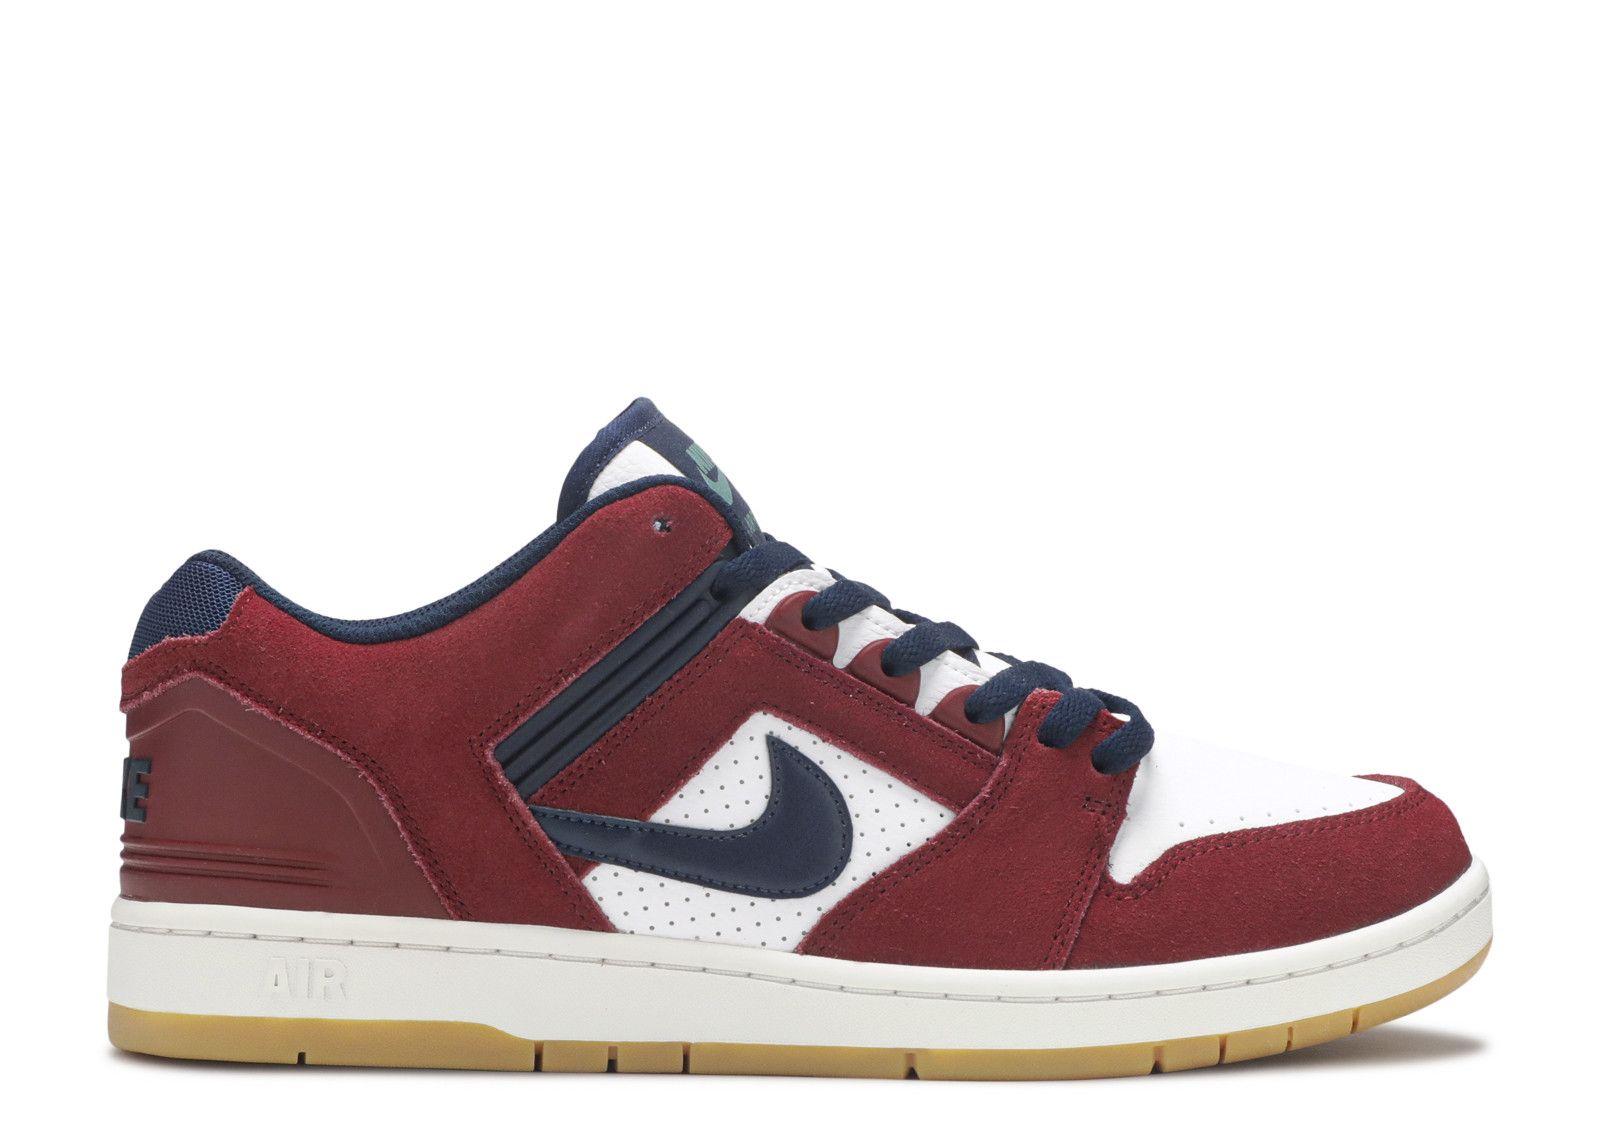 Air Force 2 Low SB 'Team Red Obsidian' - Nike - AO0300 600 - team red ...